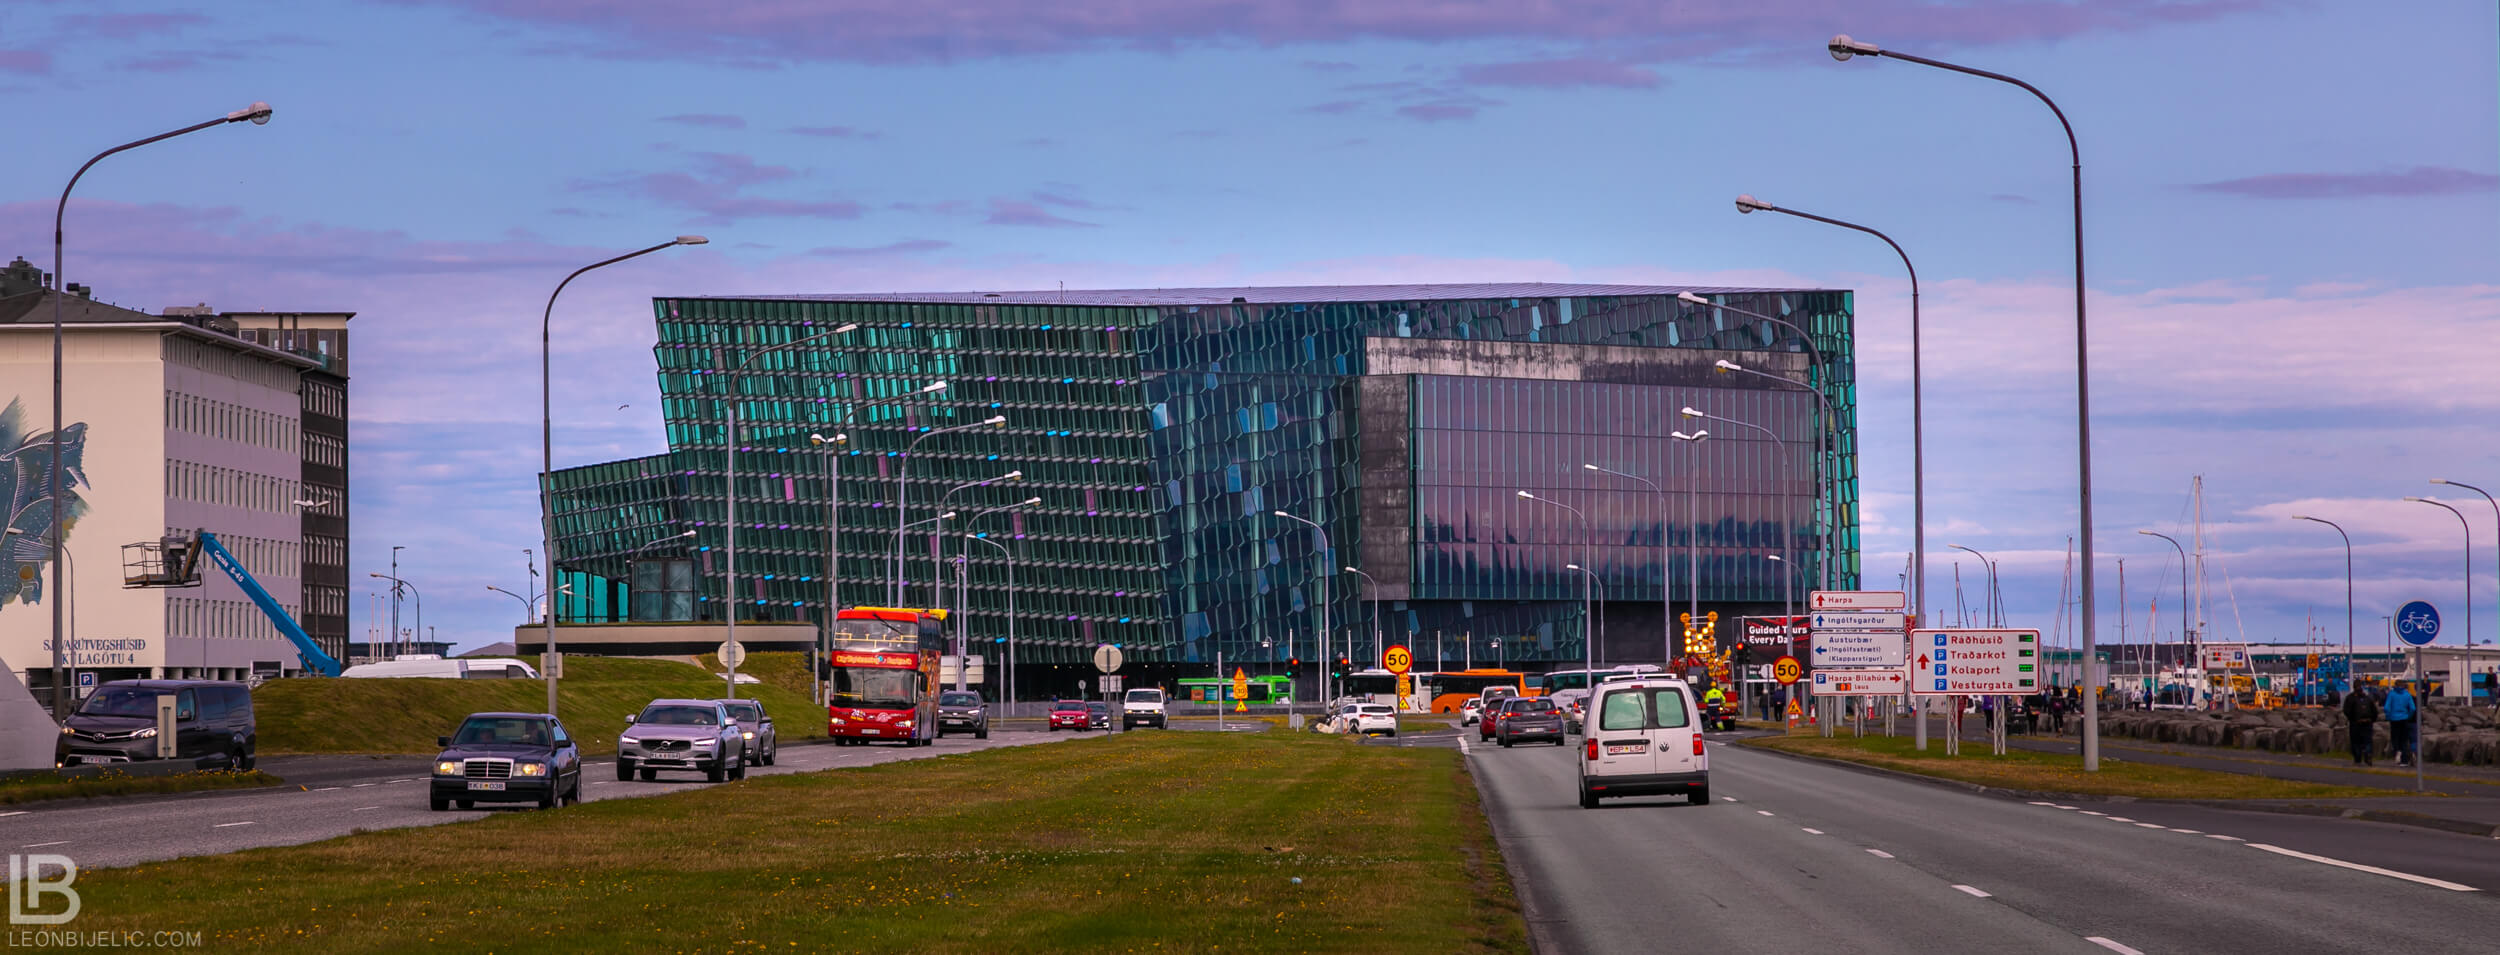 ICELAND - CAPITAL CITY REYKJAVIK - PHOTOS - SUNSET VIEW BEAUTIFUL PLANE PURPLE COLOR - the Harpa Concert Hall - Old Harbour